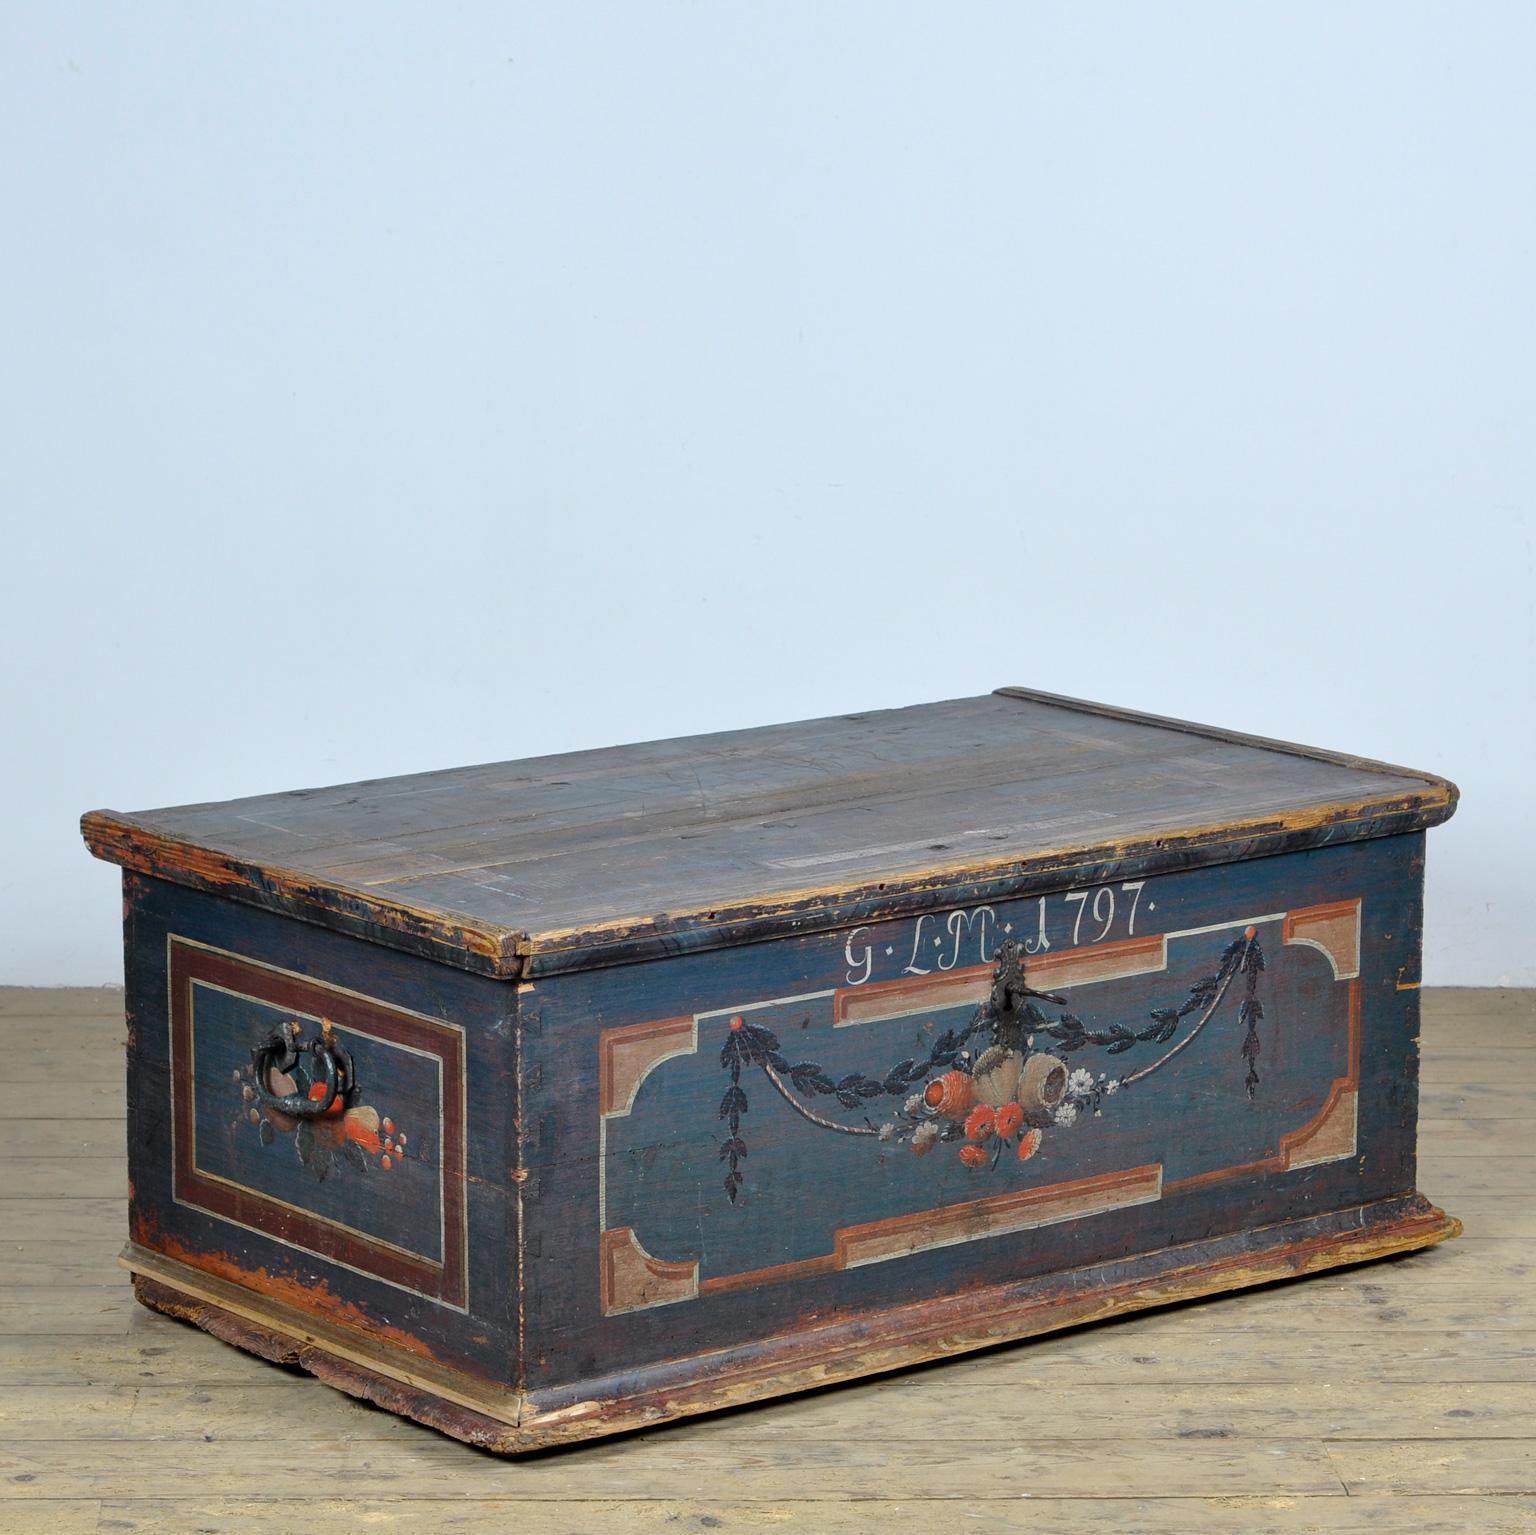 A pine wedding chest from Central Europe, probably German, dated 1797. The Neoclassical style persisted in Europe until after the 1820s. This color scheme of terracotta red and earthy blue is typical of the style and is often seen in Swedish and